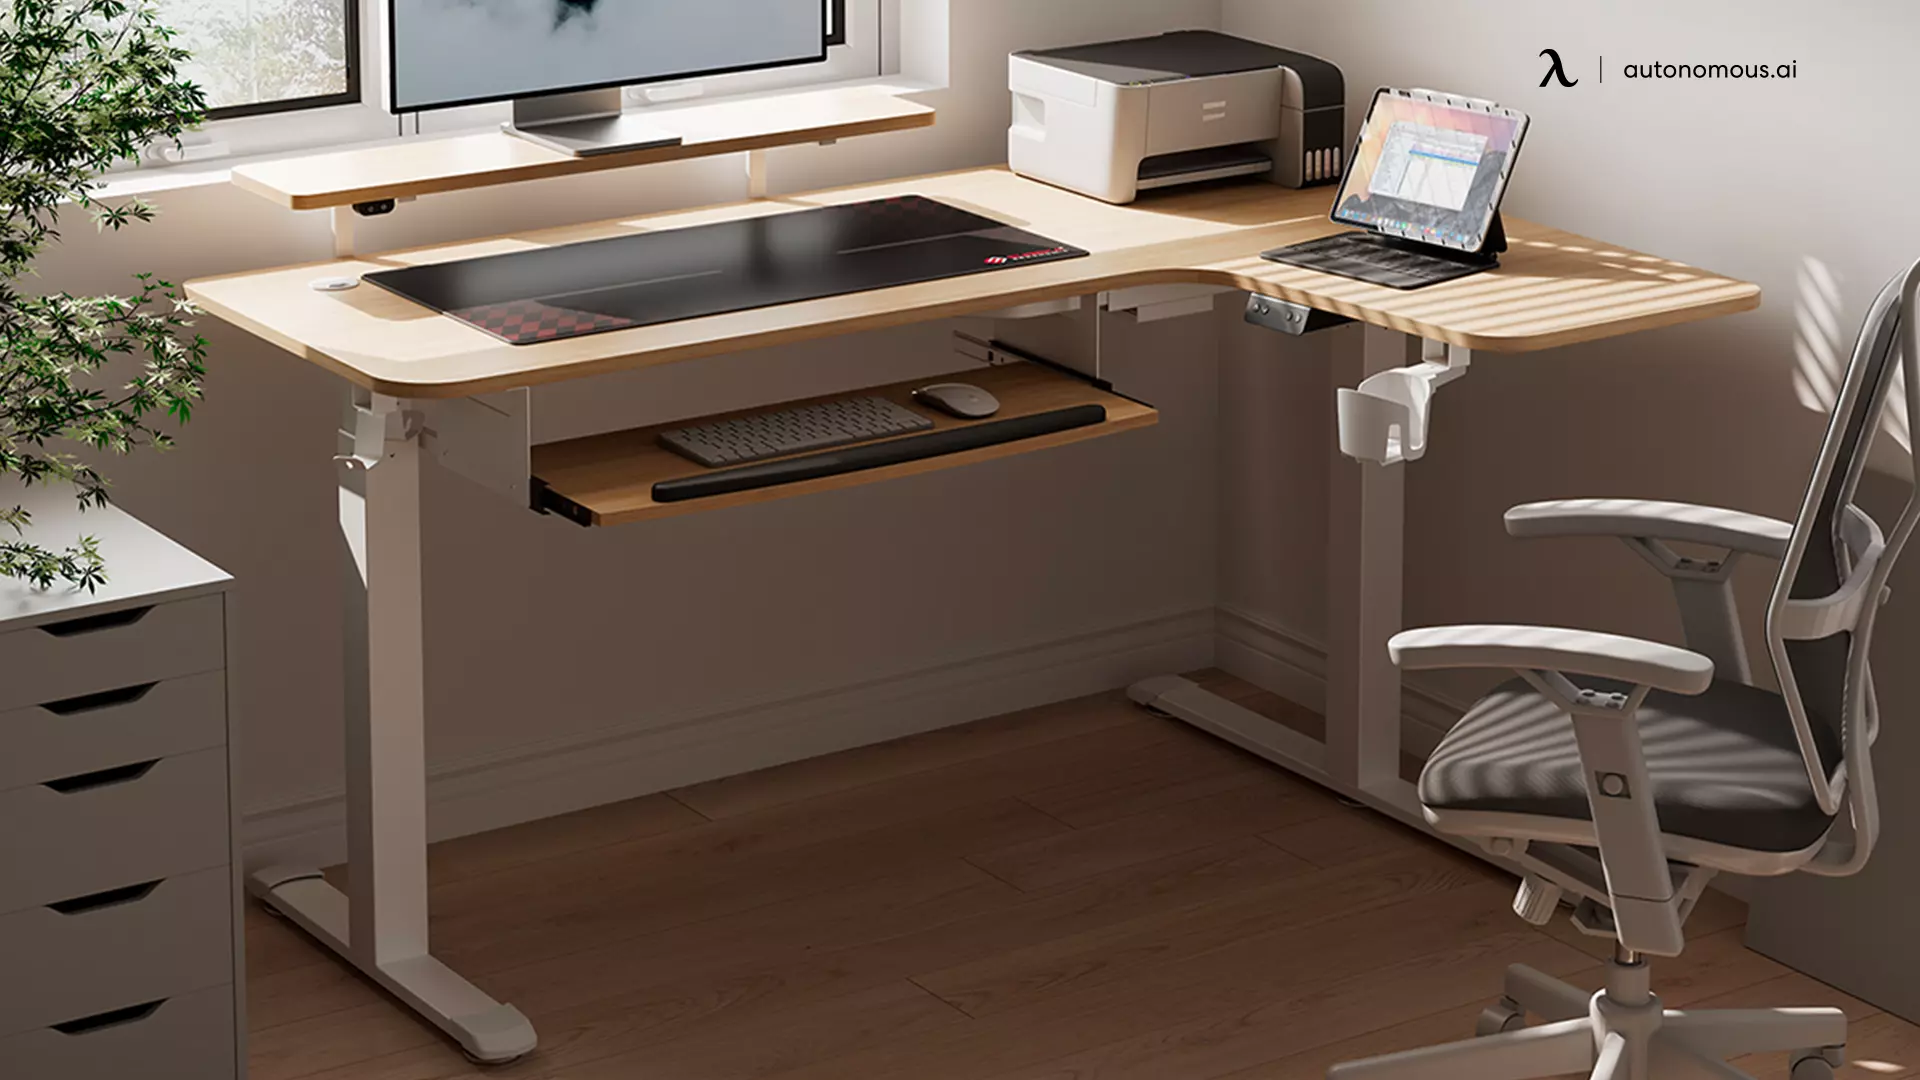 L-shaped Desks if You Like to Spread - desk makeover ideas